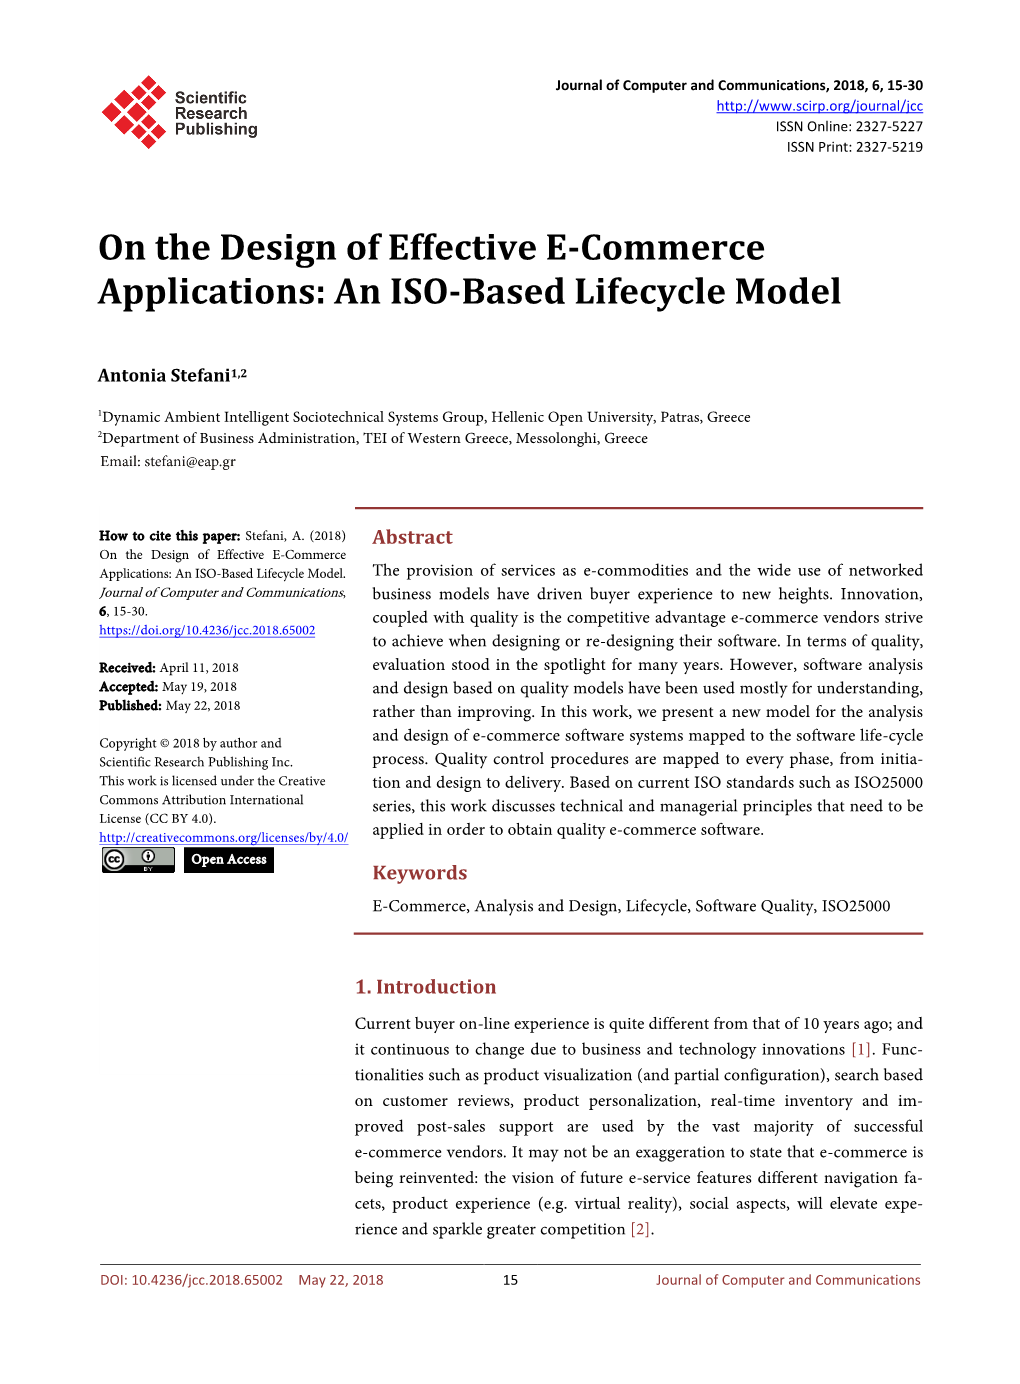 On the Design of Effective E-Commerce Applications: an ISO-Based Lifecycle Model